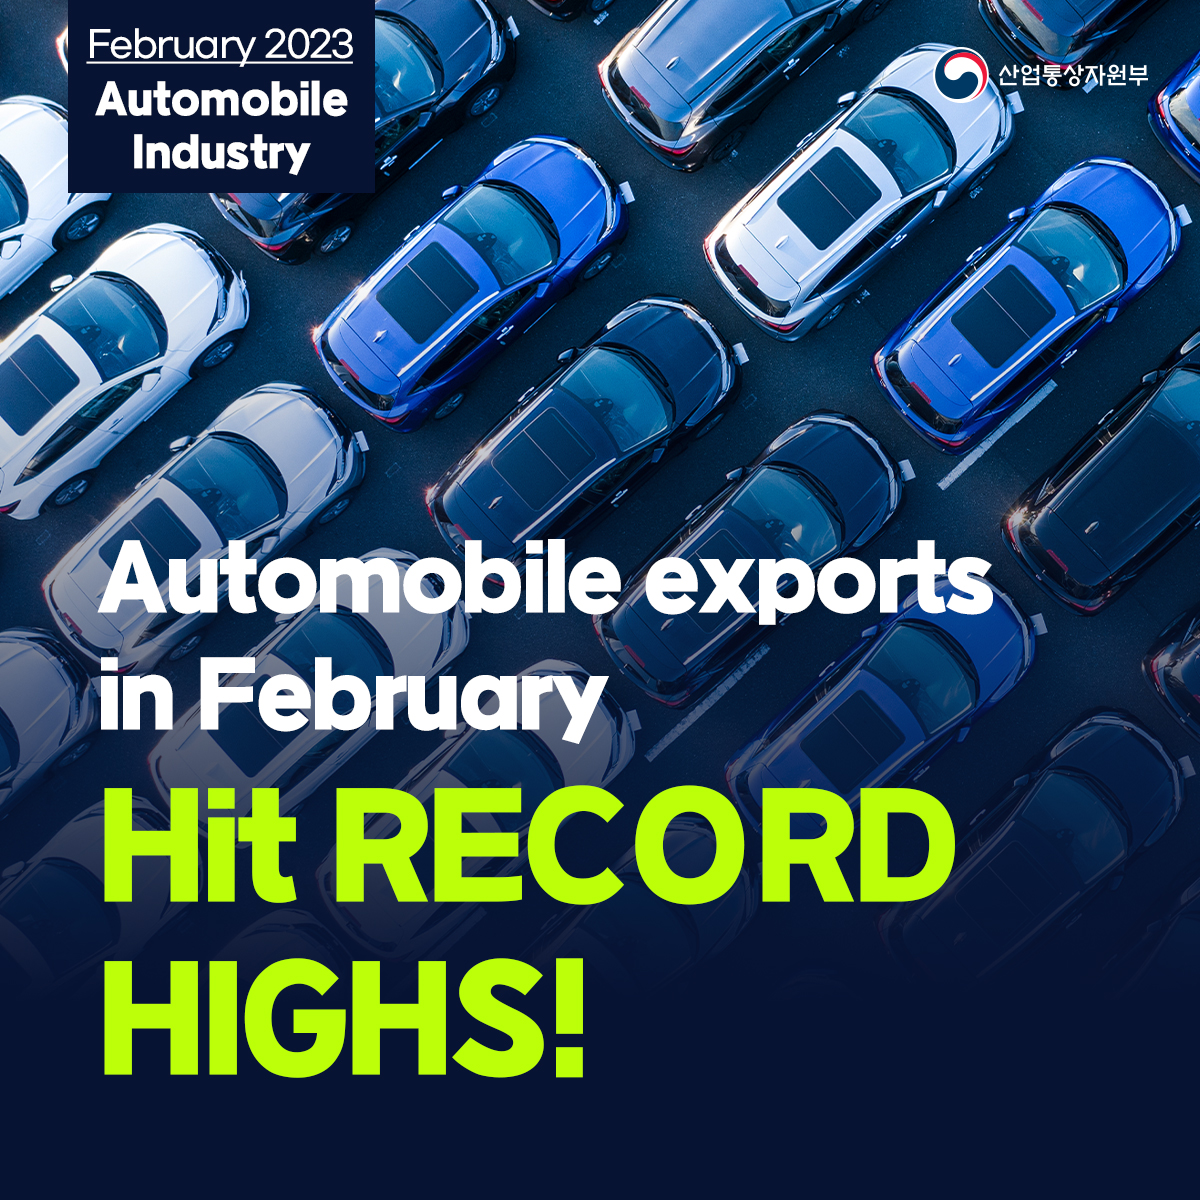 Korea's auto exports hit all-time highs in February!